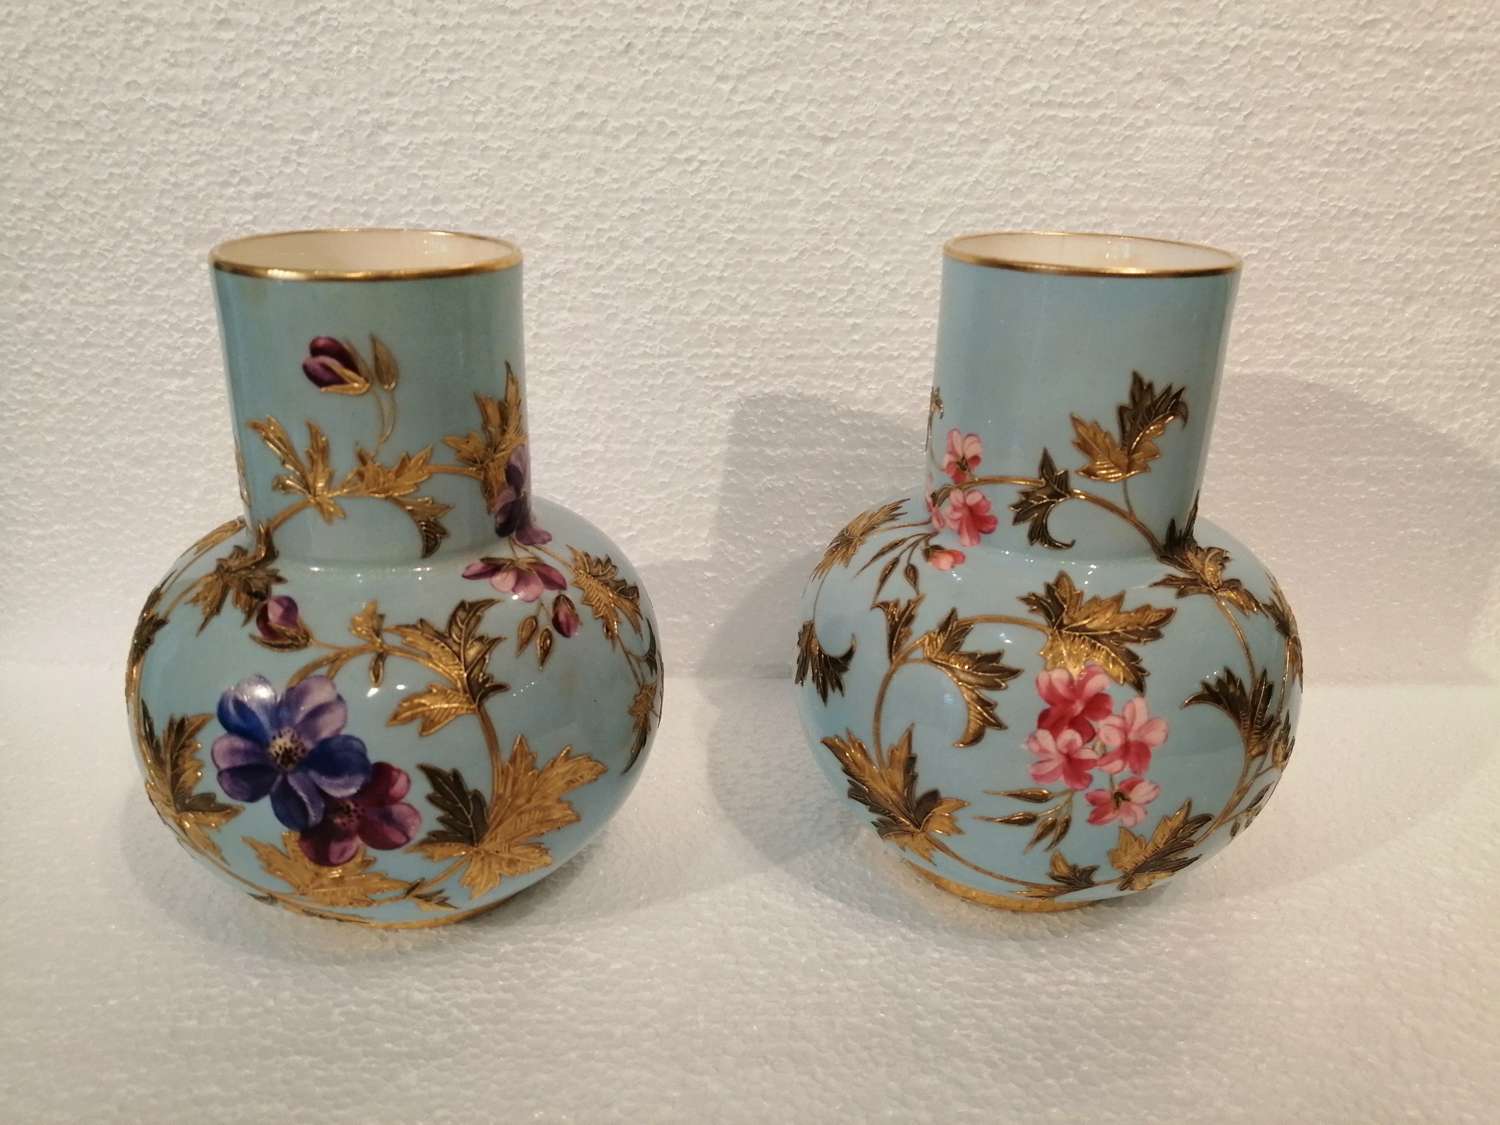 A fine quality pair of Royal Worcester vases